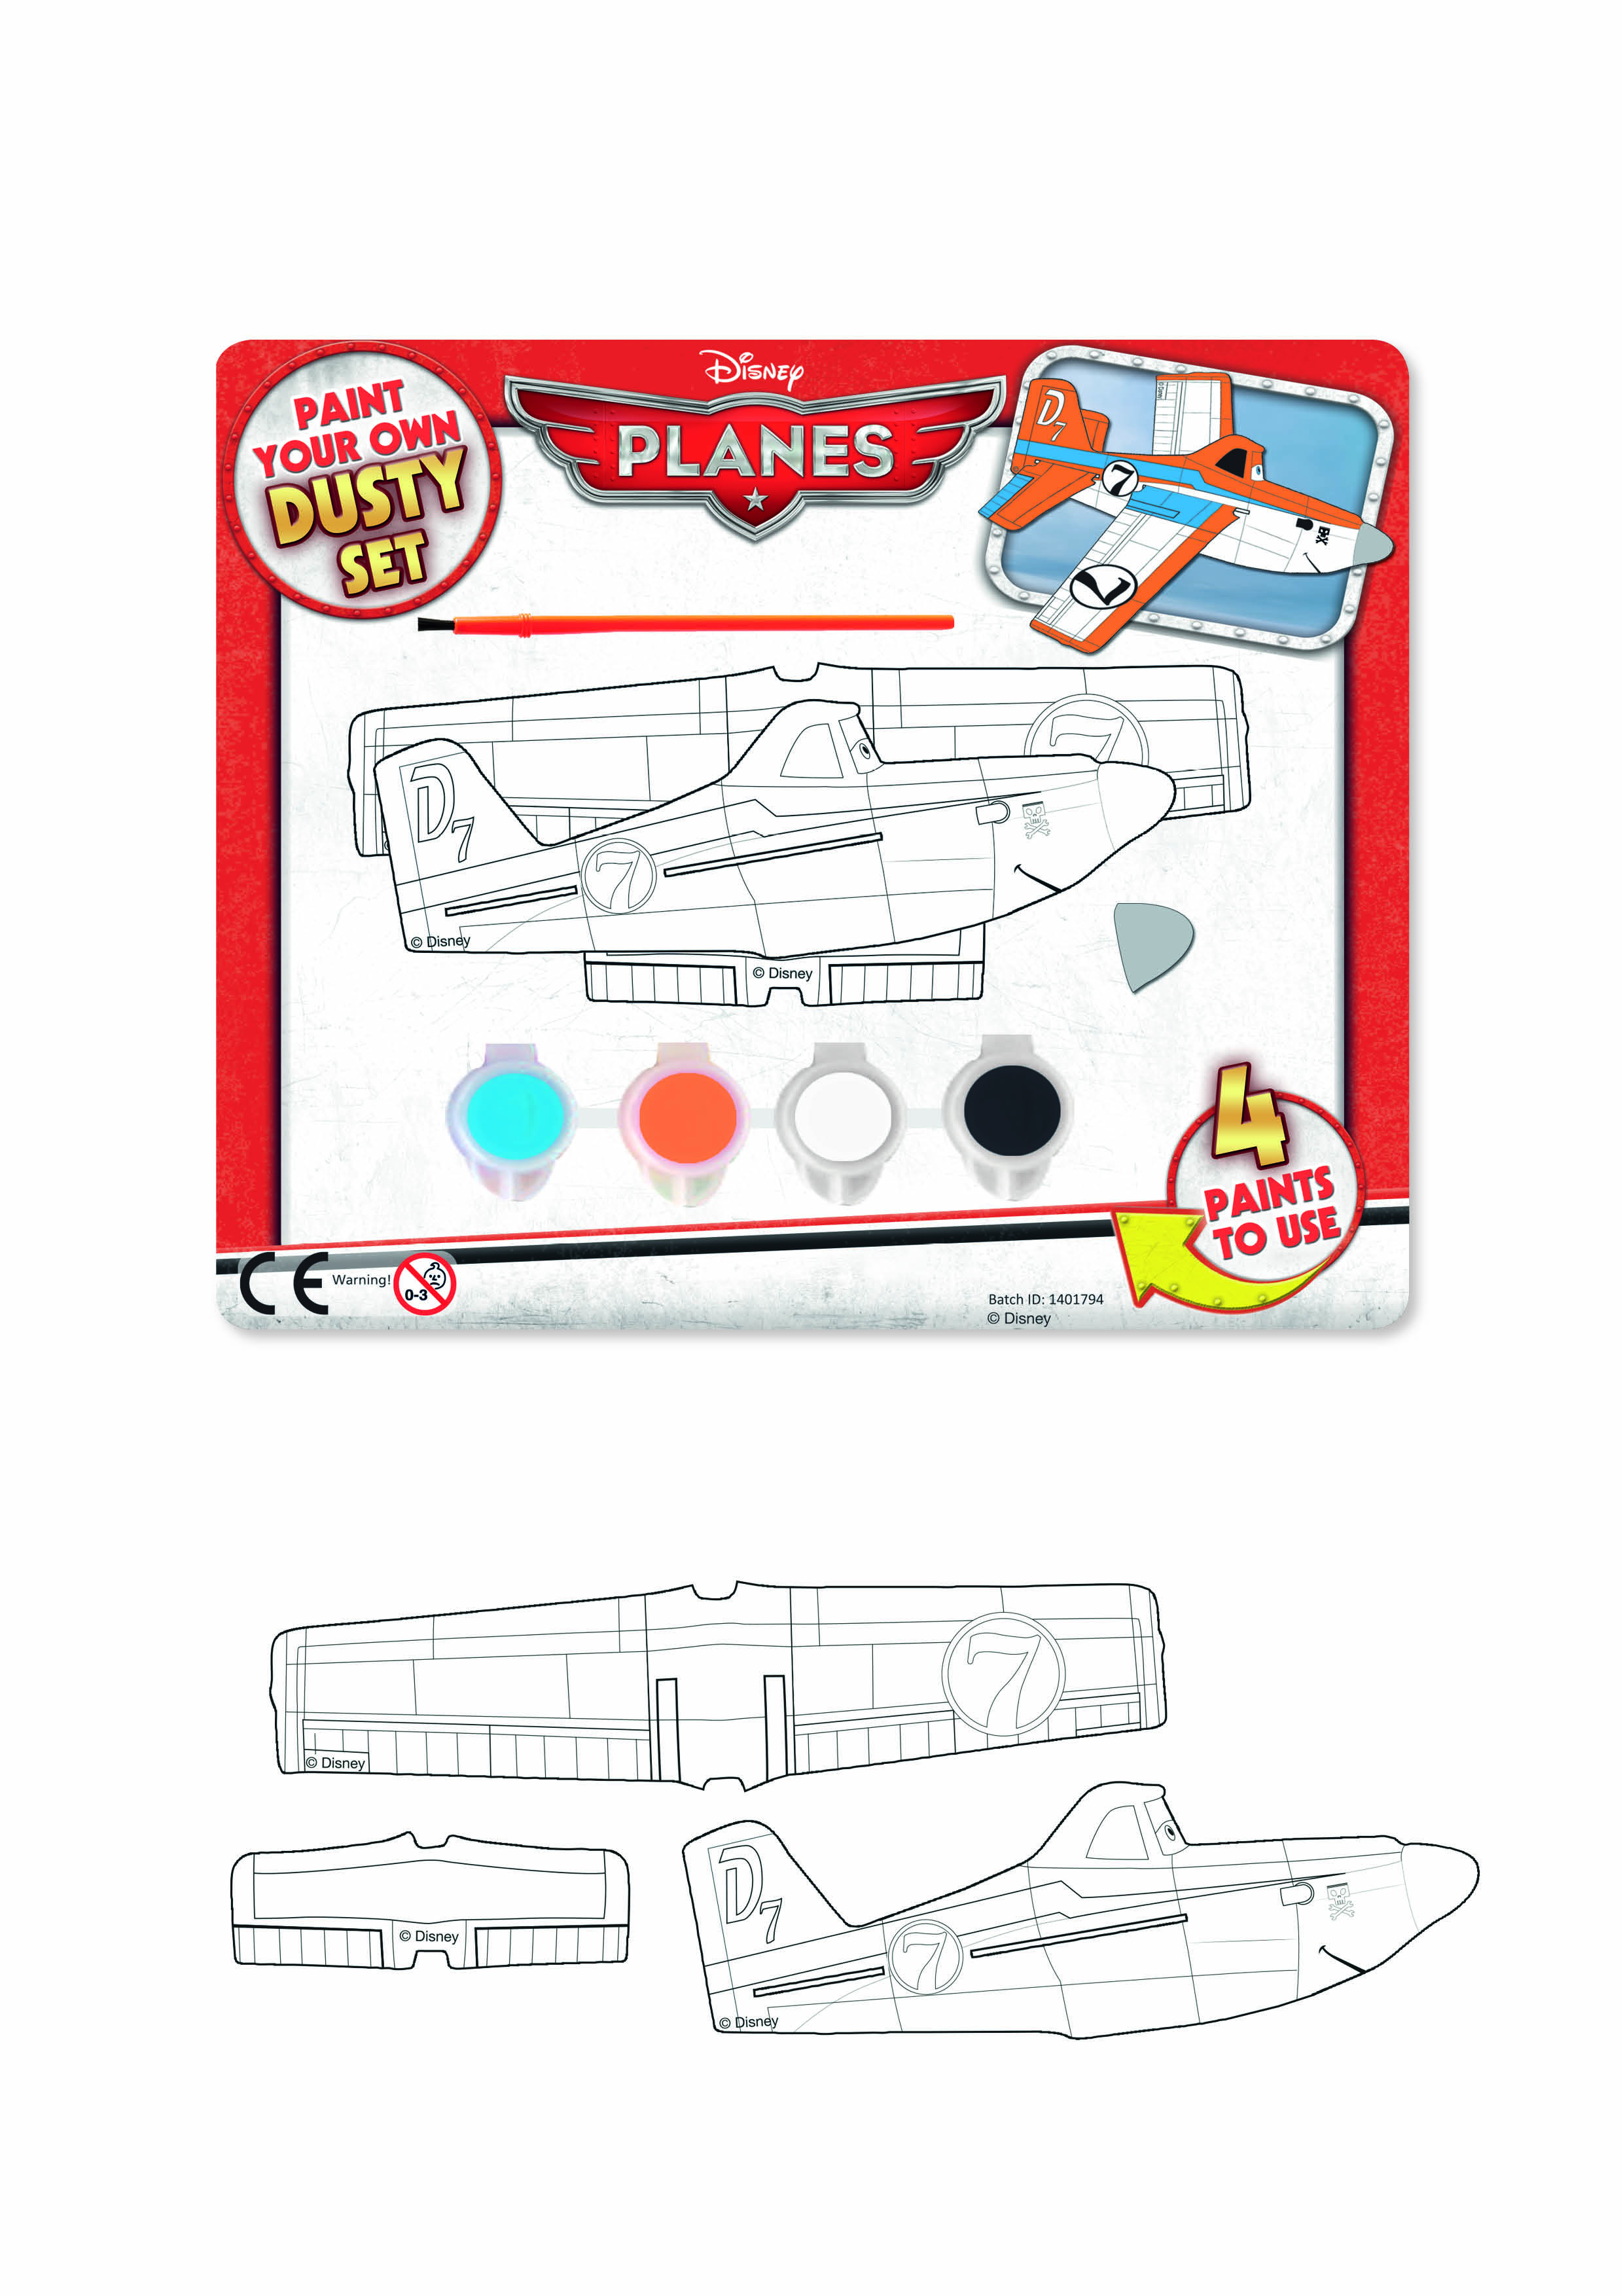 Make your own plane